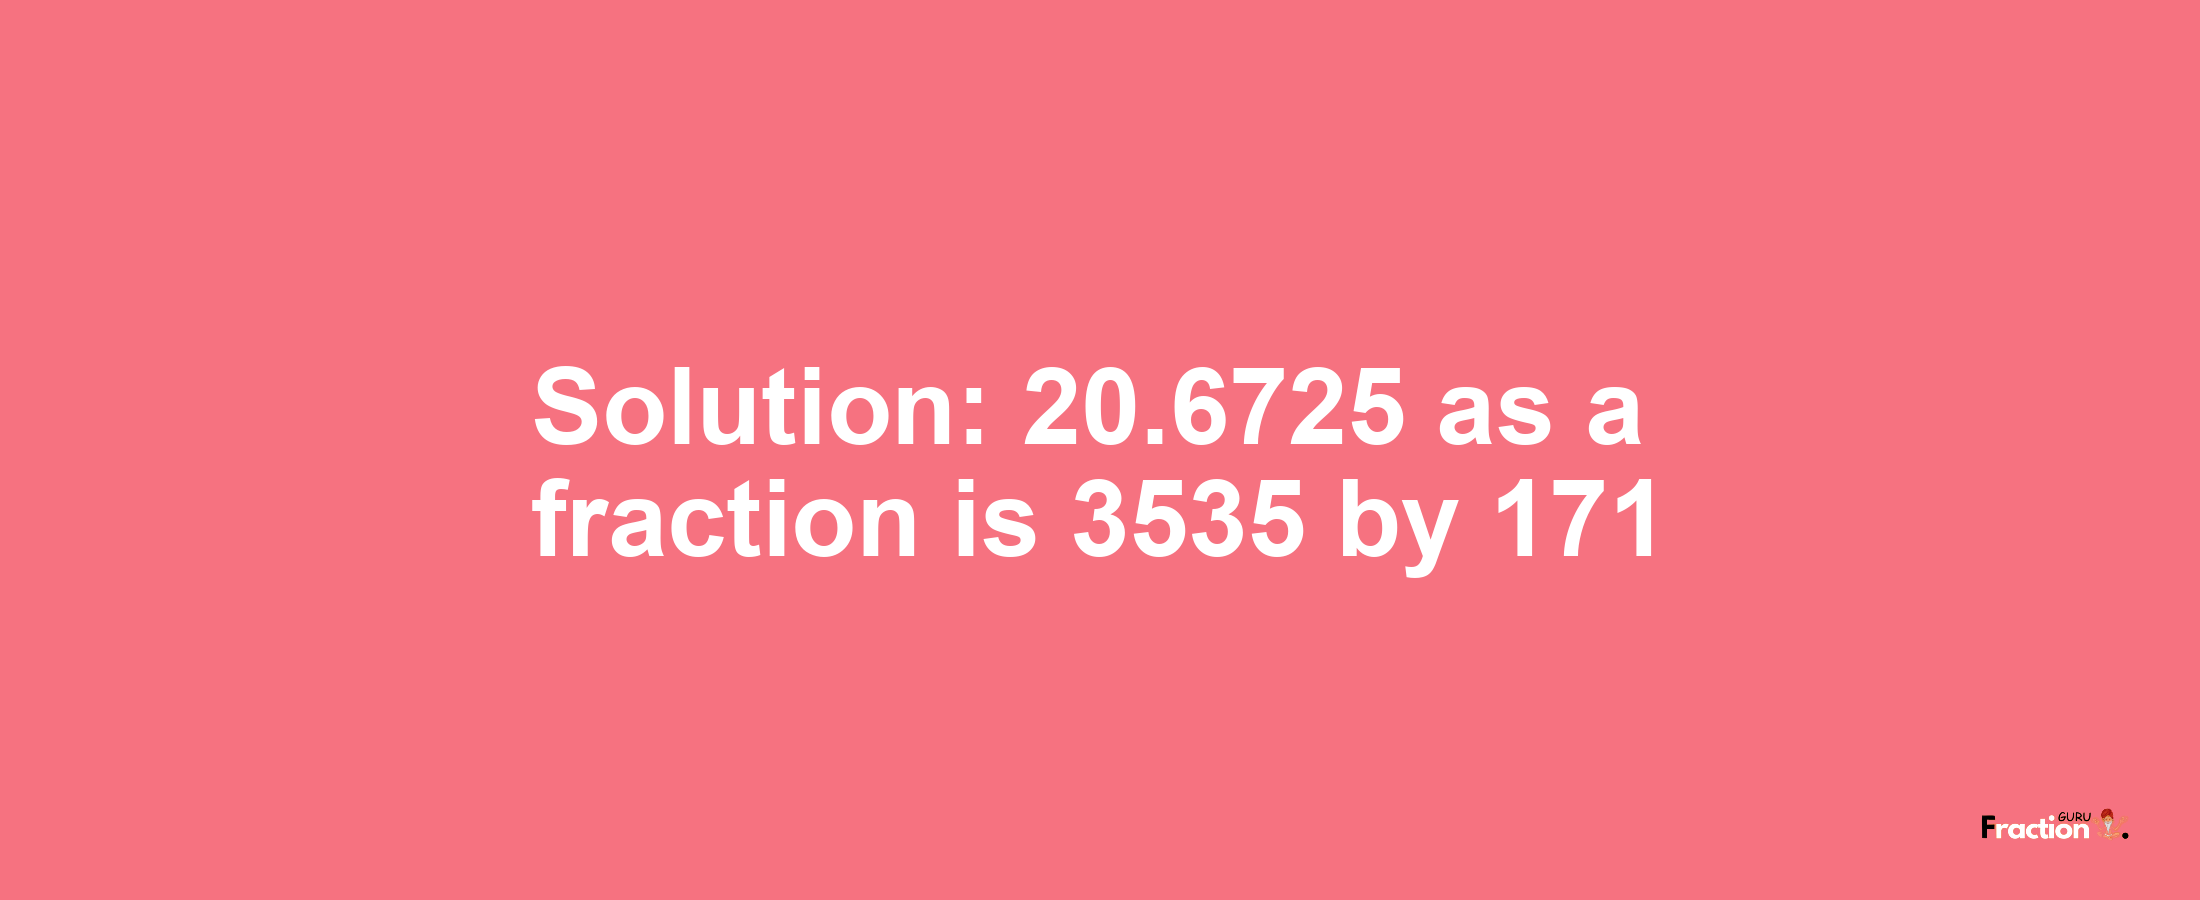 Solution:20.6725 as a fraction is 3535/171